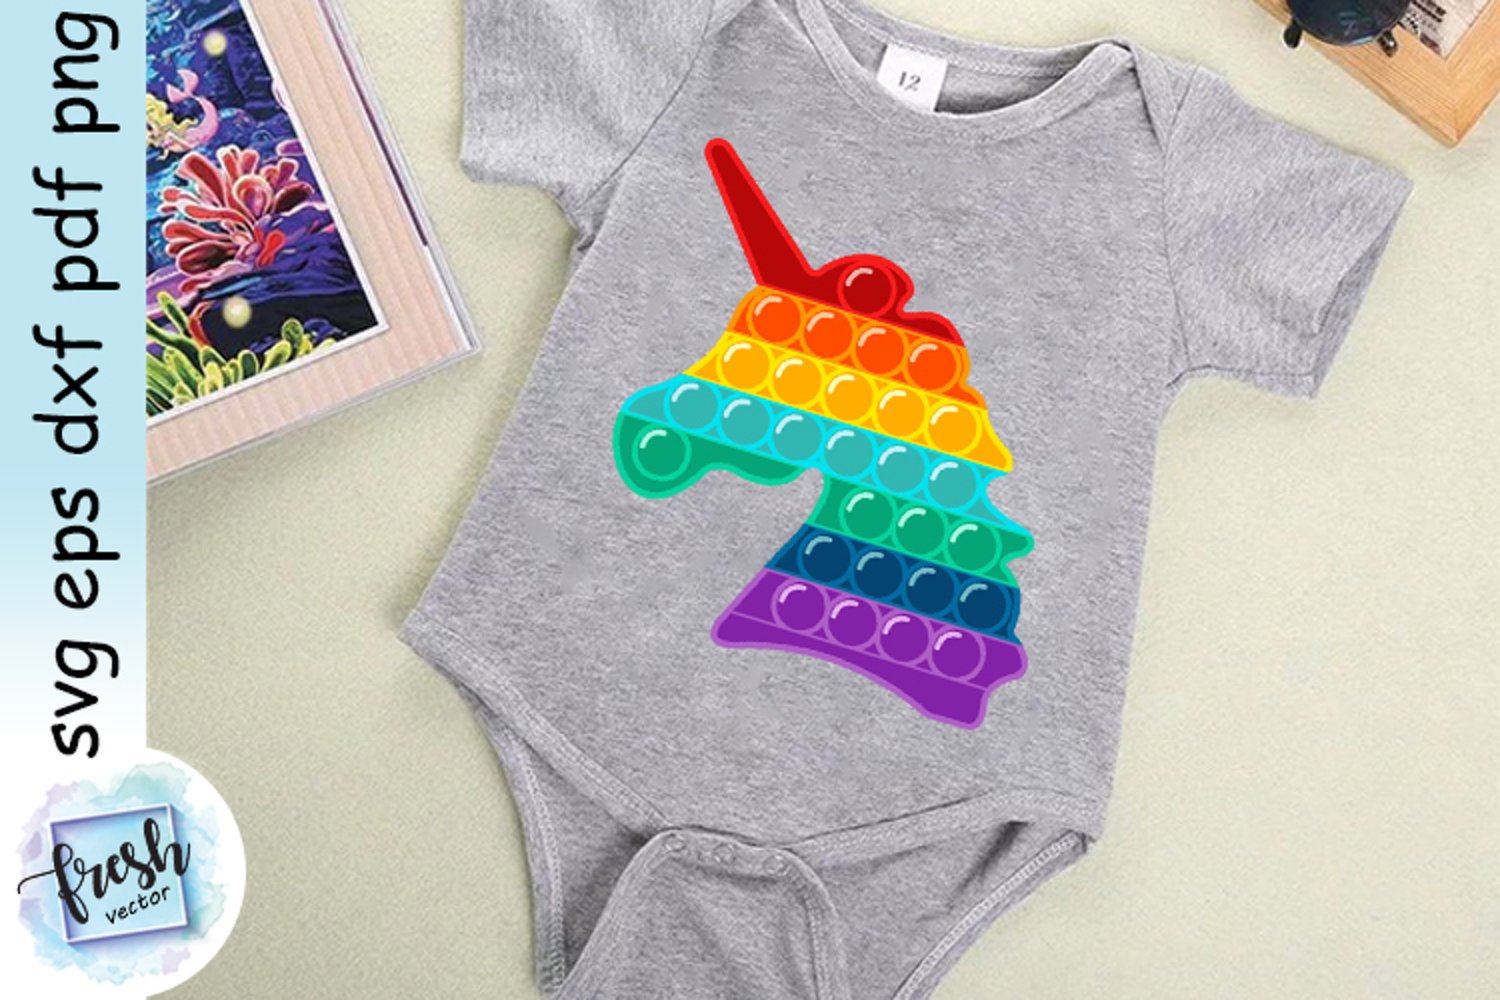 Perfect for kid's clothes design.